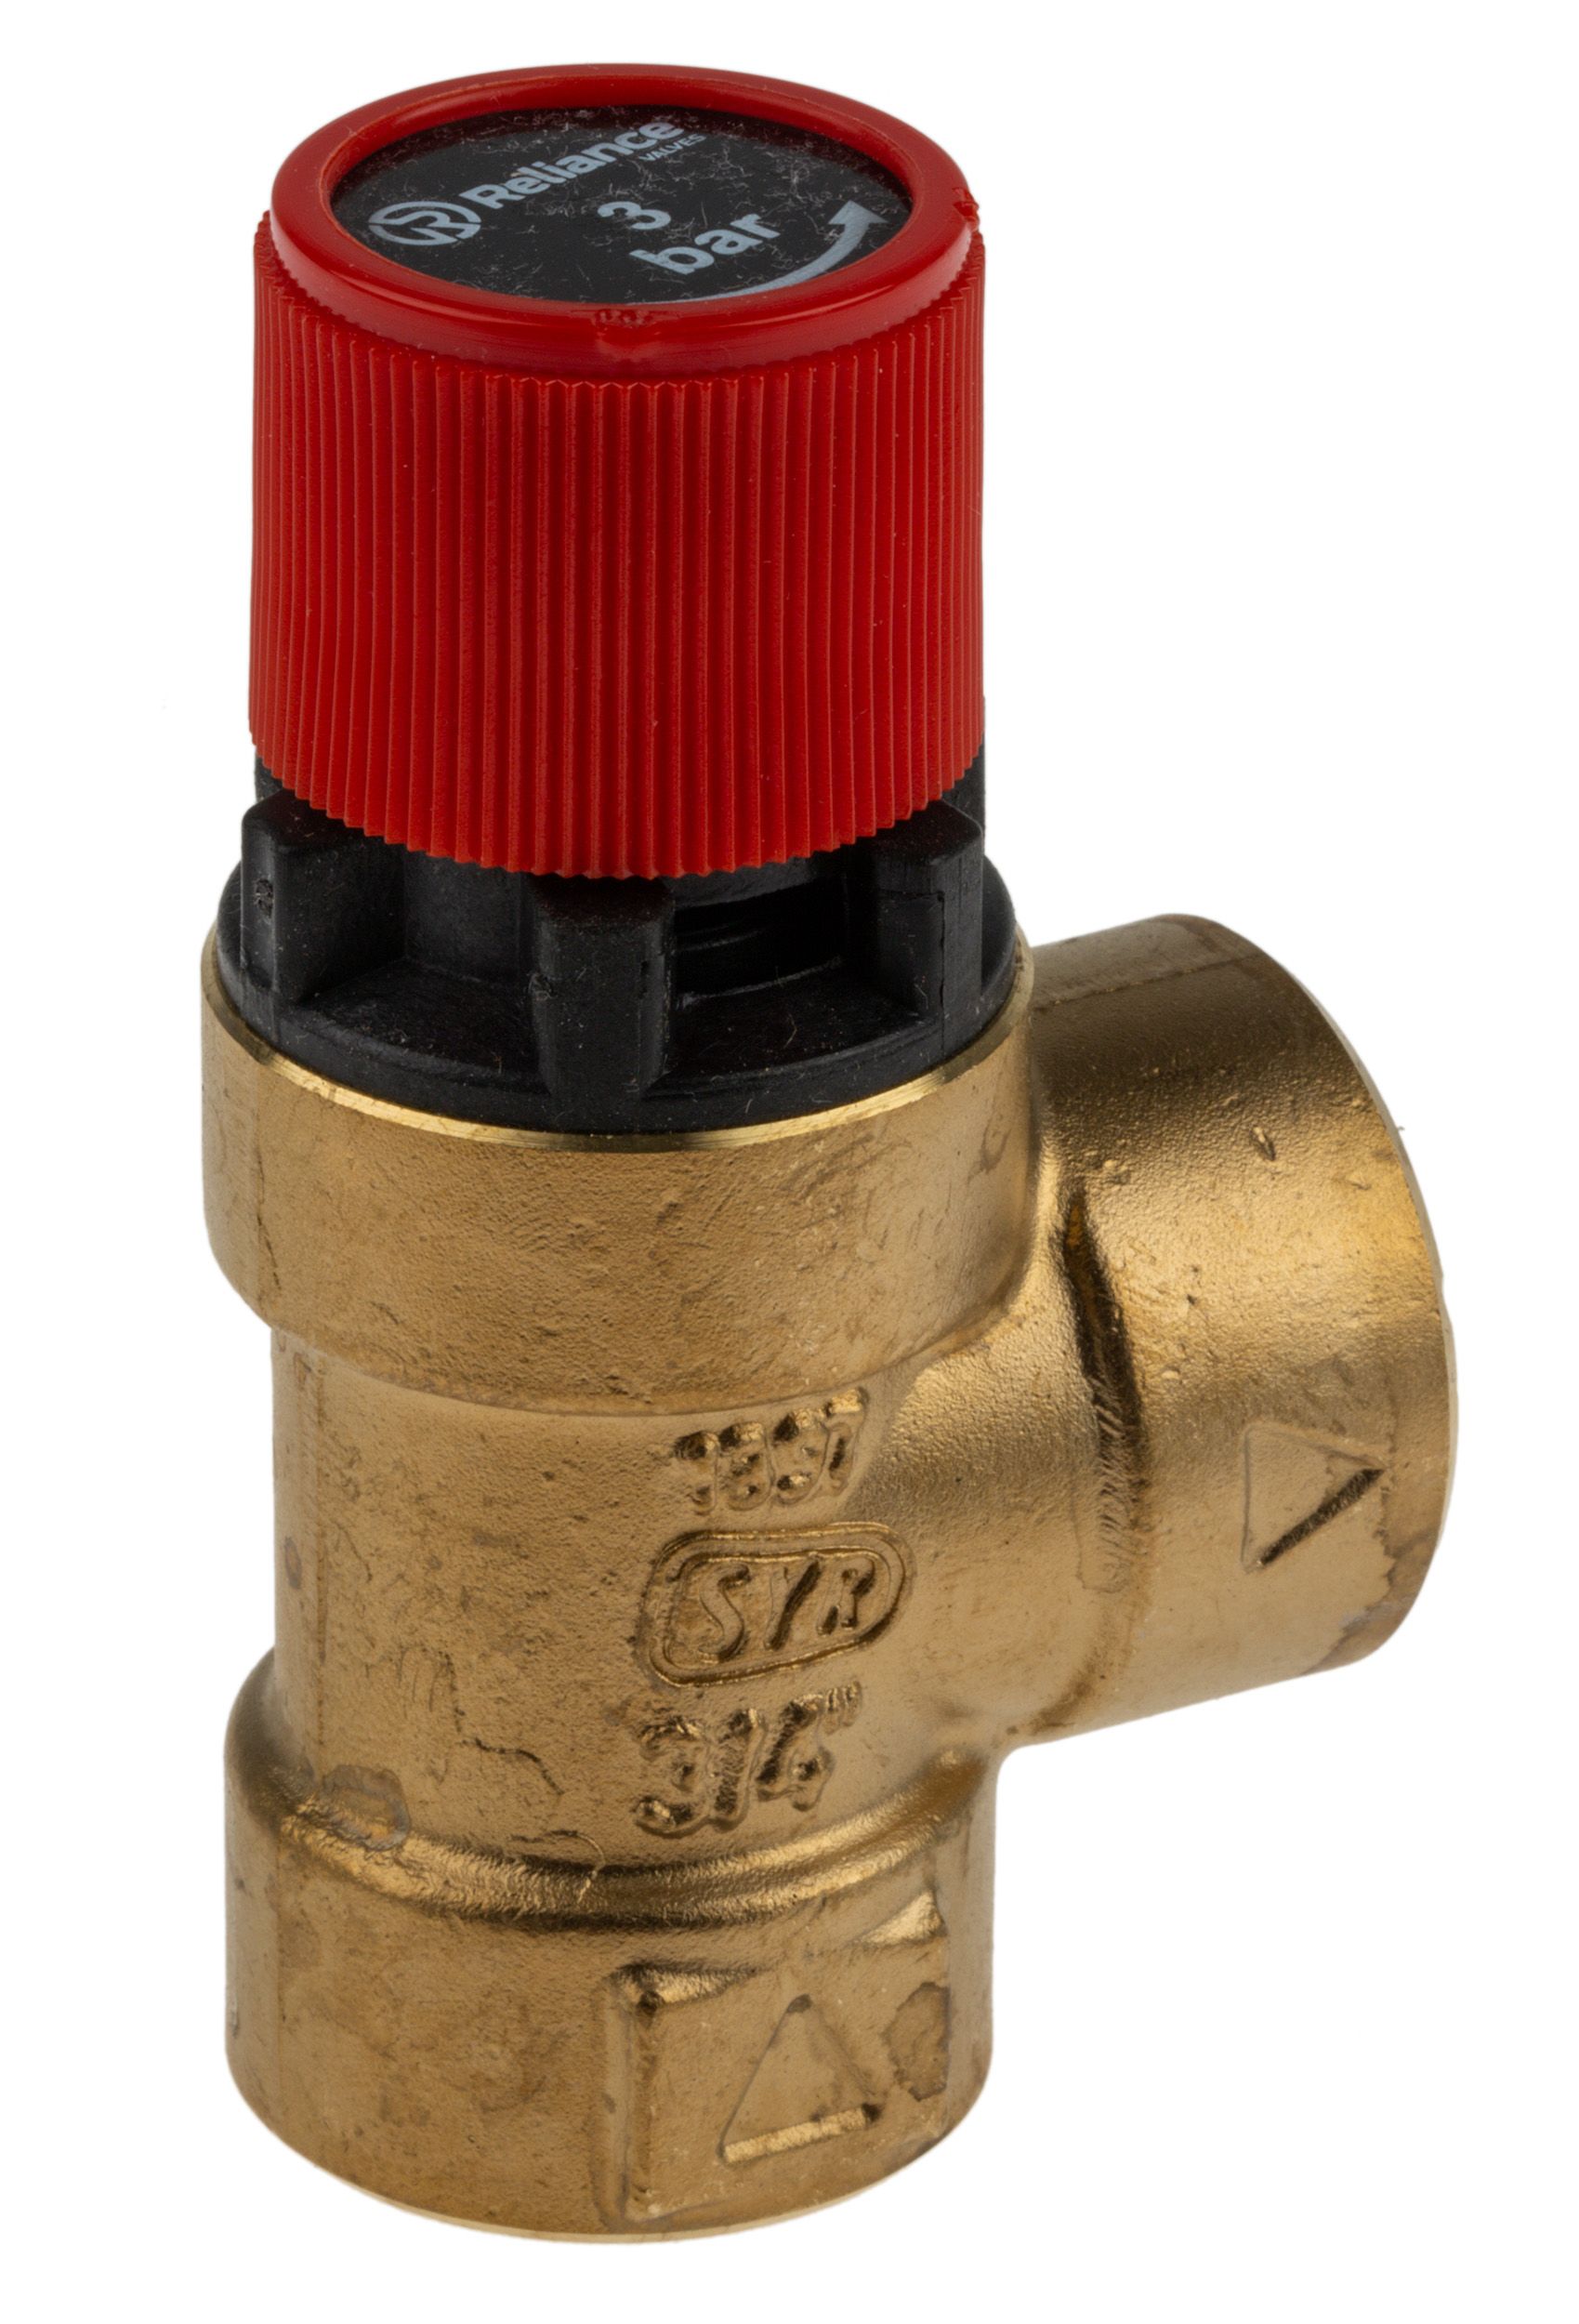 Reliance 3bar Pressure Relief Valve With Female BSP 3/4 in BSP Female Connection and a BSP 3/4 Exhaust Port